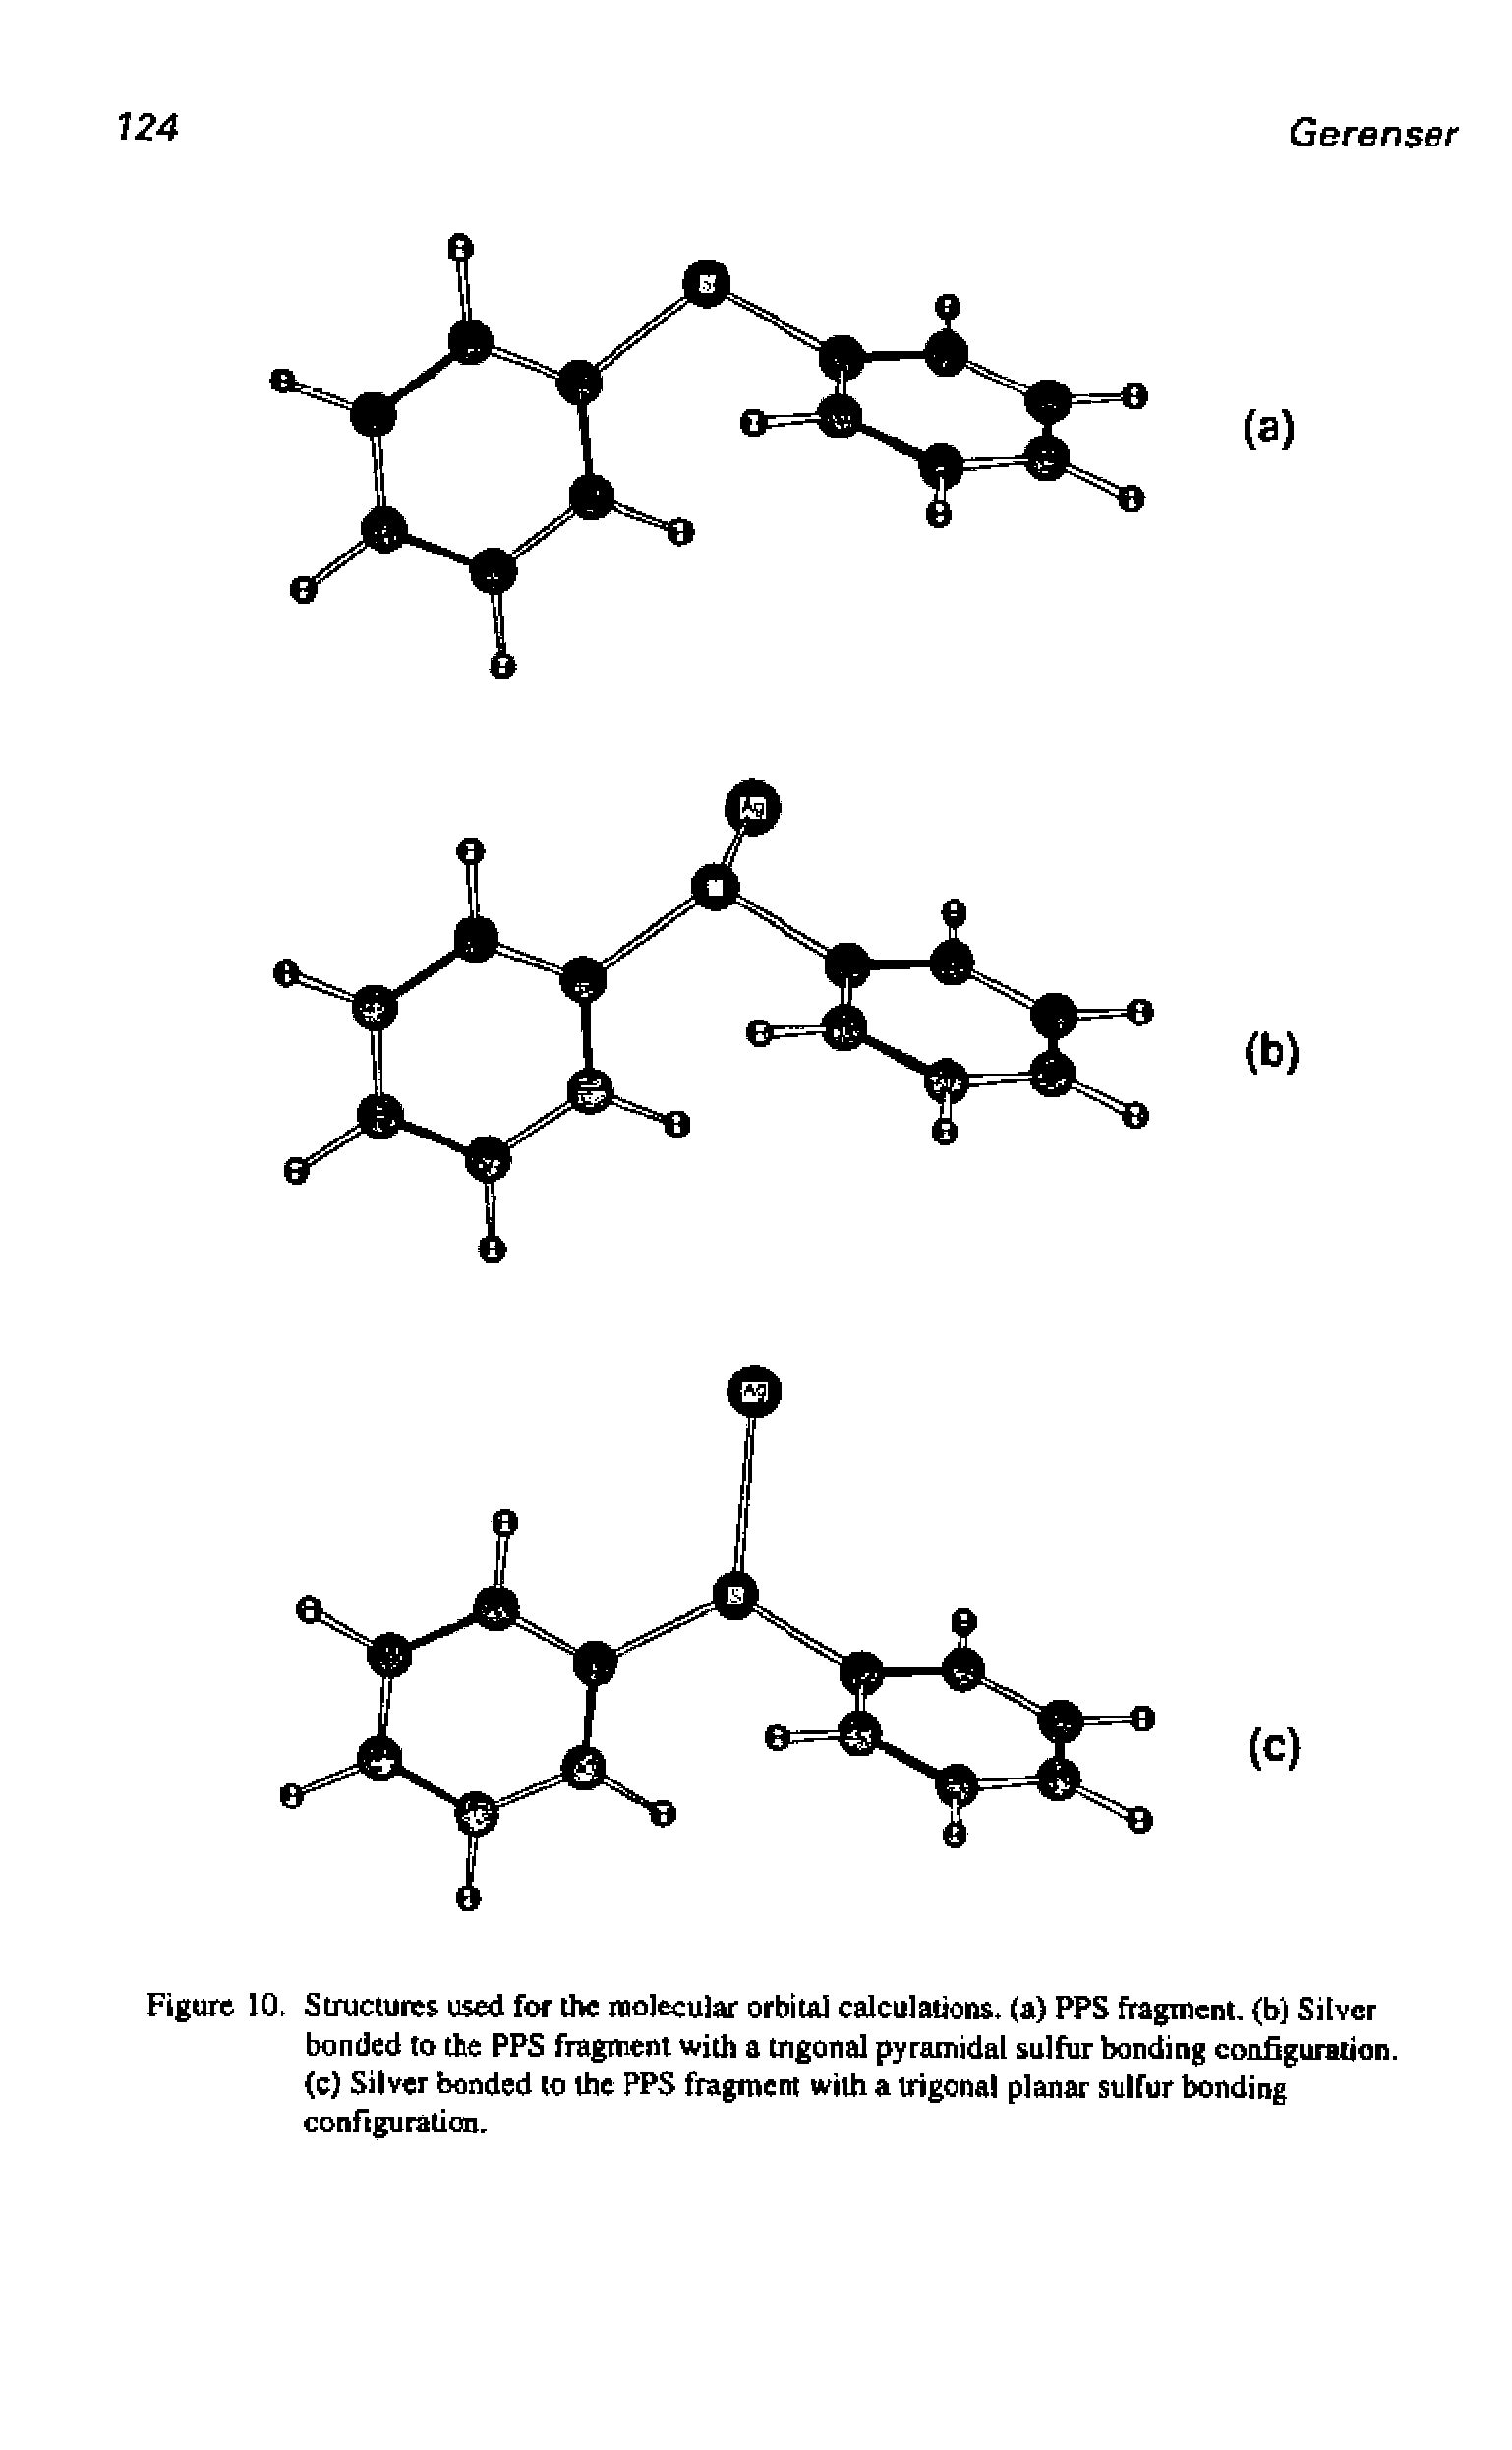 Figure 10. Structures used for the molecular orbital calculations, (a) PPS fragment, (b) Silver bonded to the PPS fragment with a trigonal pyramidal sulfur banding configuration. <c) Silver bonded to the PPS fragment with a trigonal planar sulfur bonding configuration.